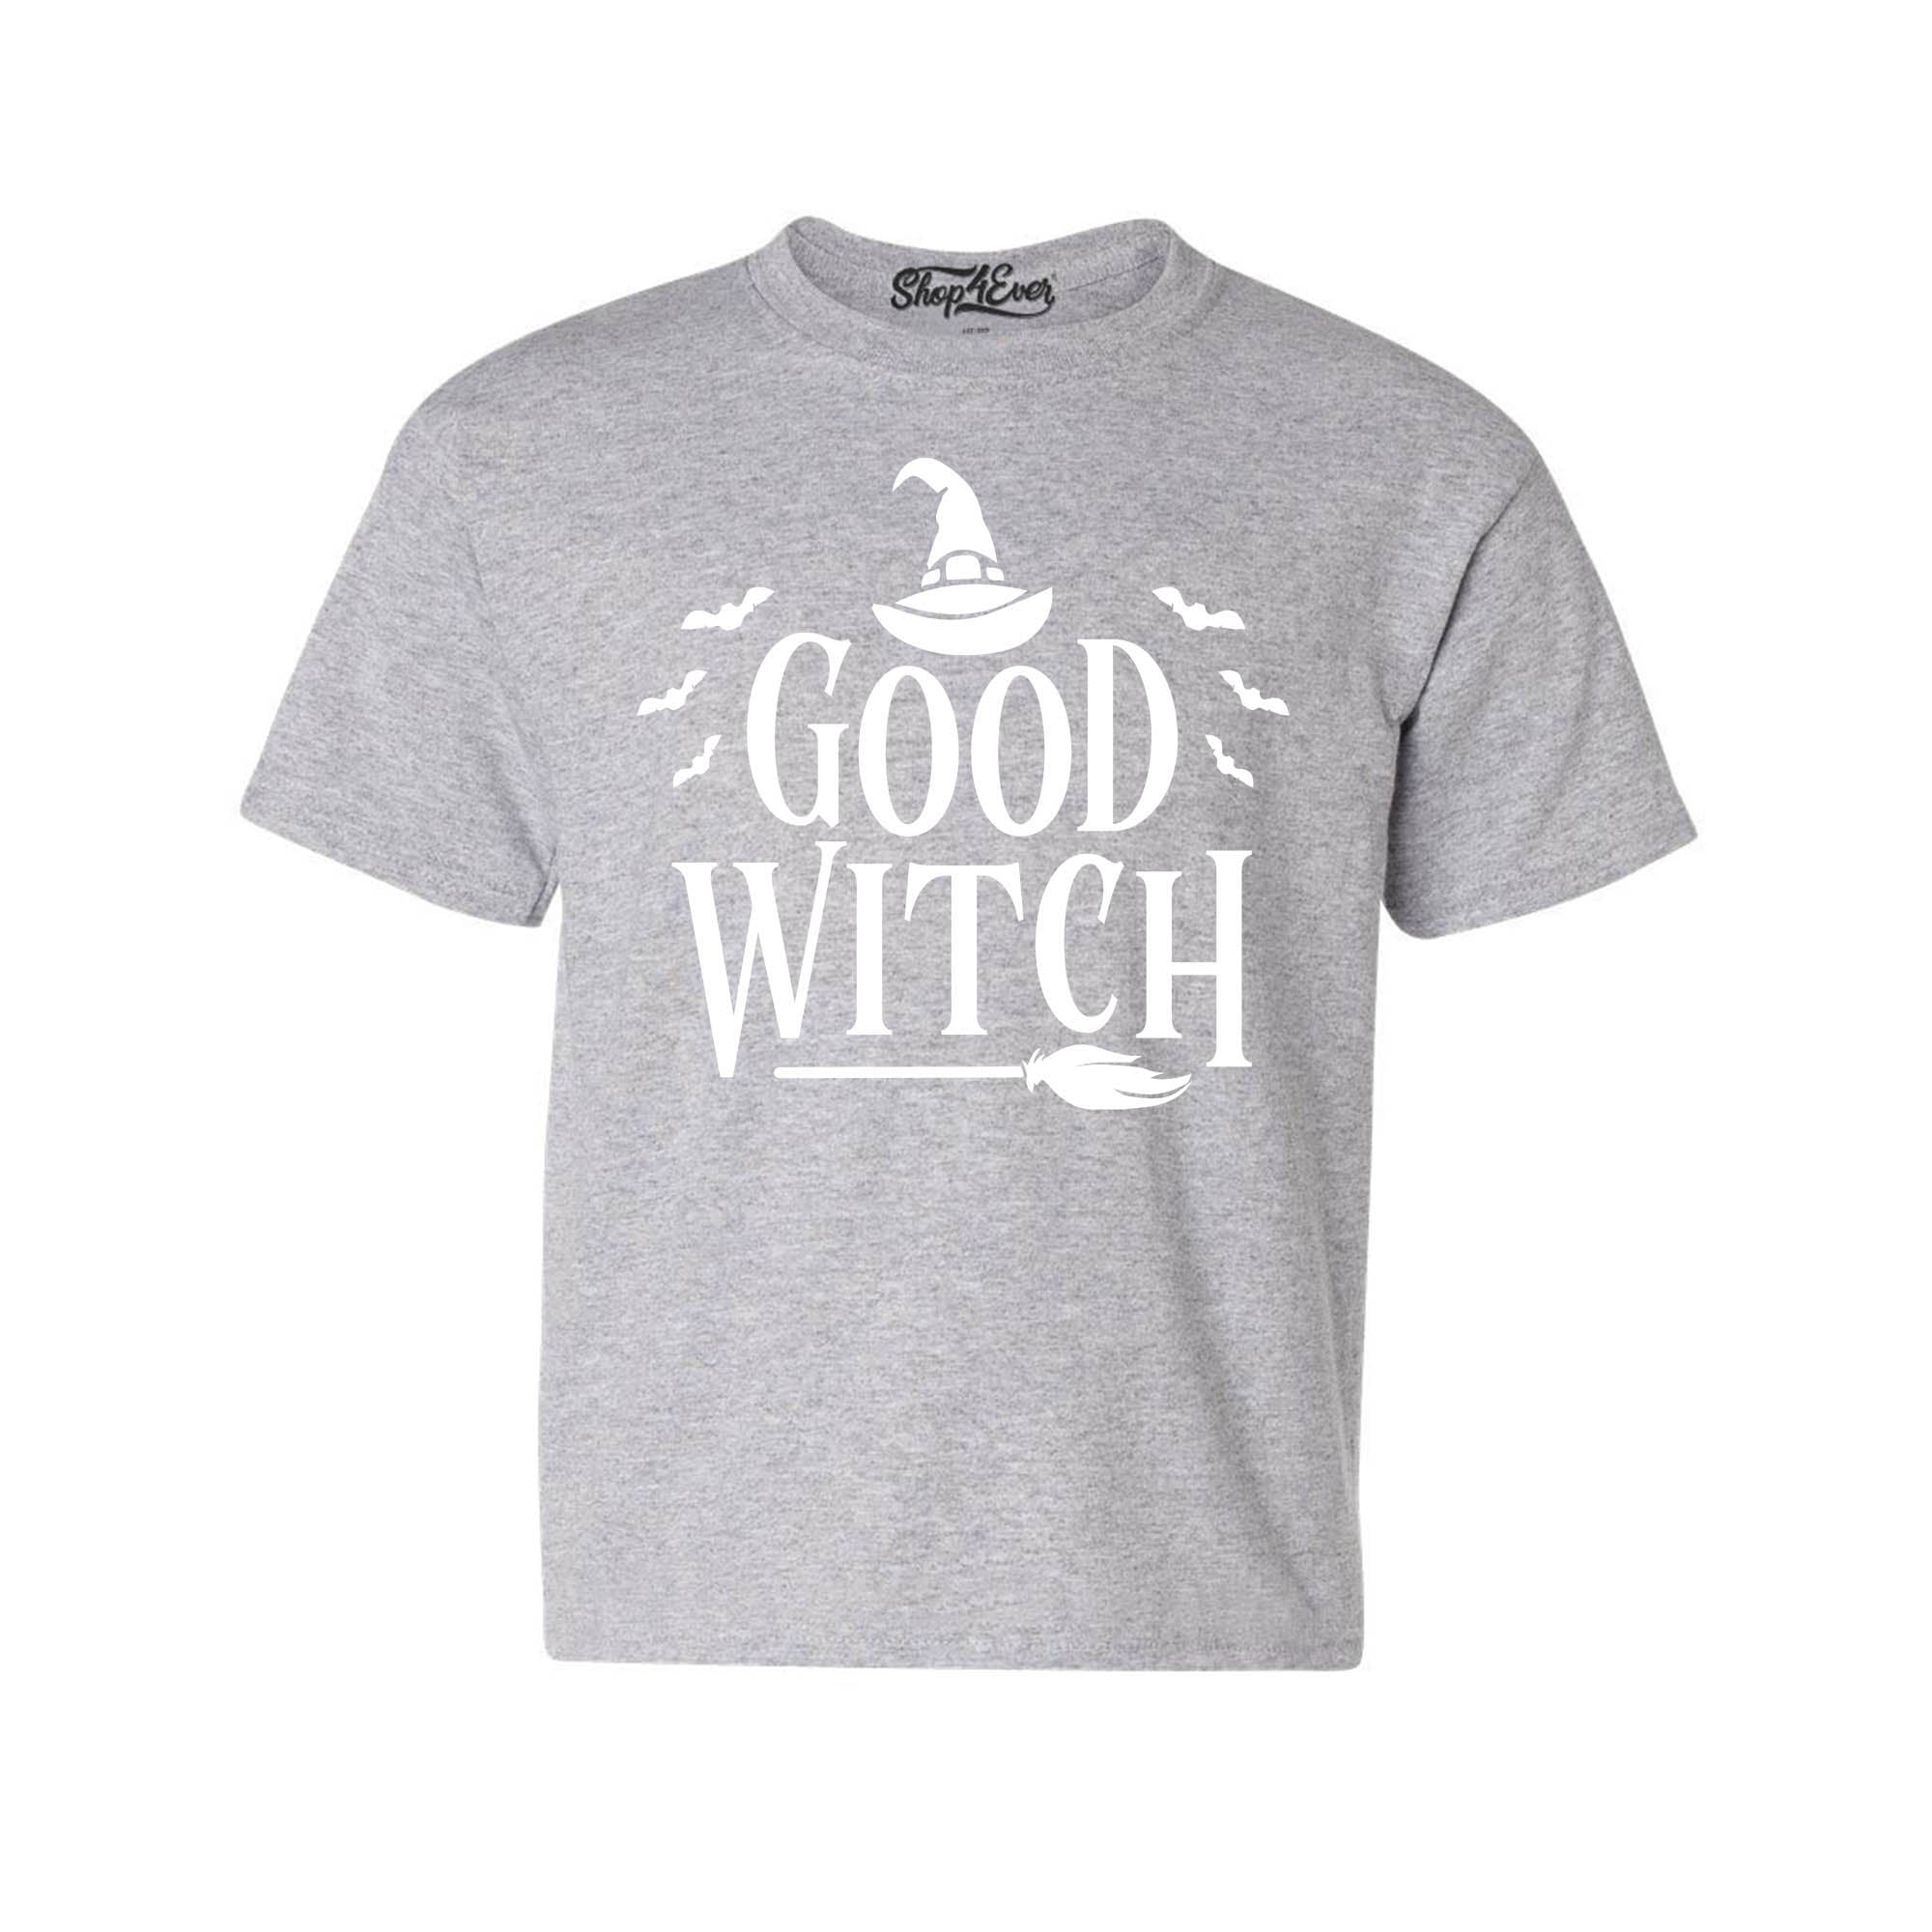 Good Witch ~ Bad Witch Child's Tee Matching Halloween Costumes Youth's T-Shirt